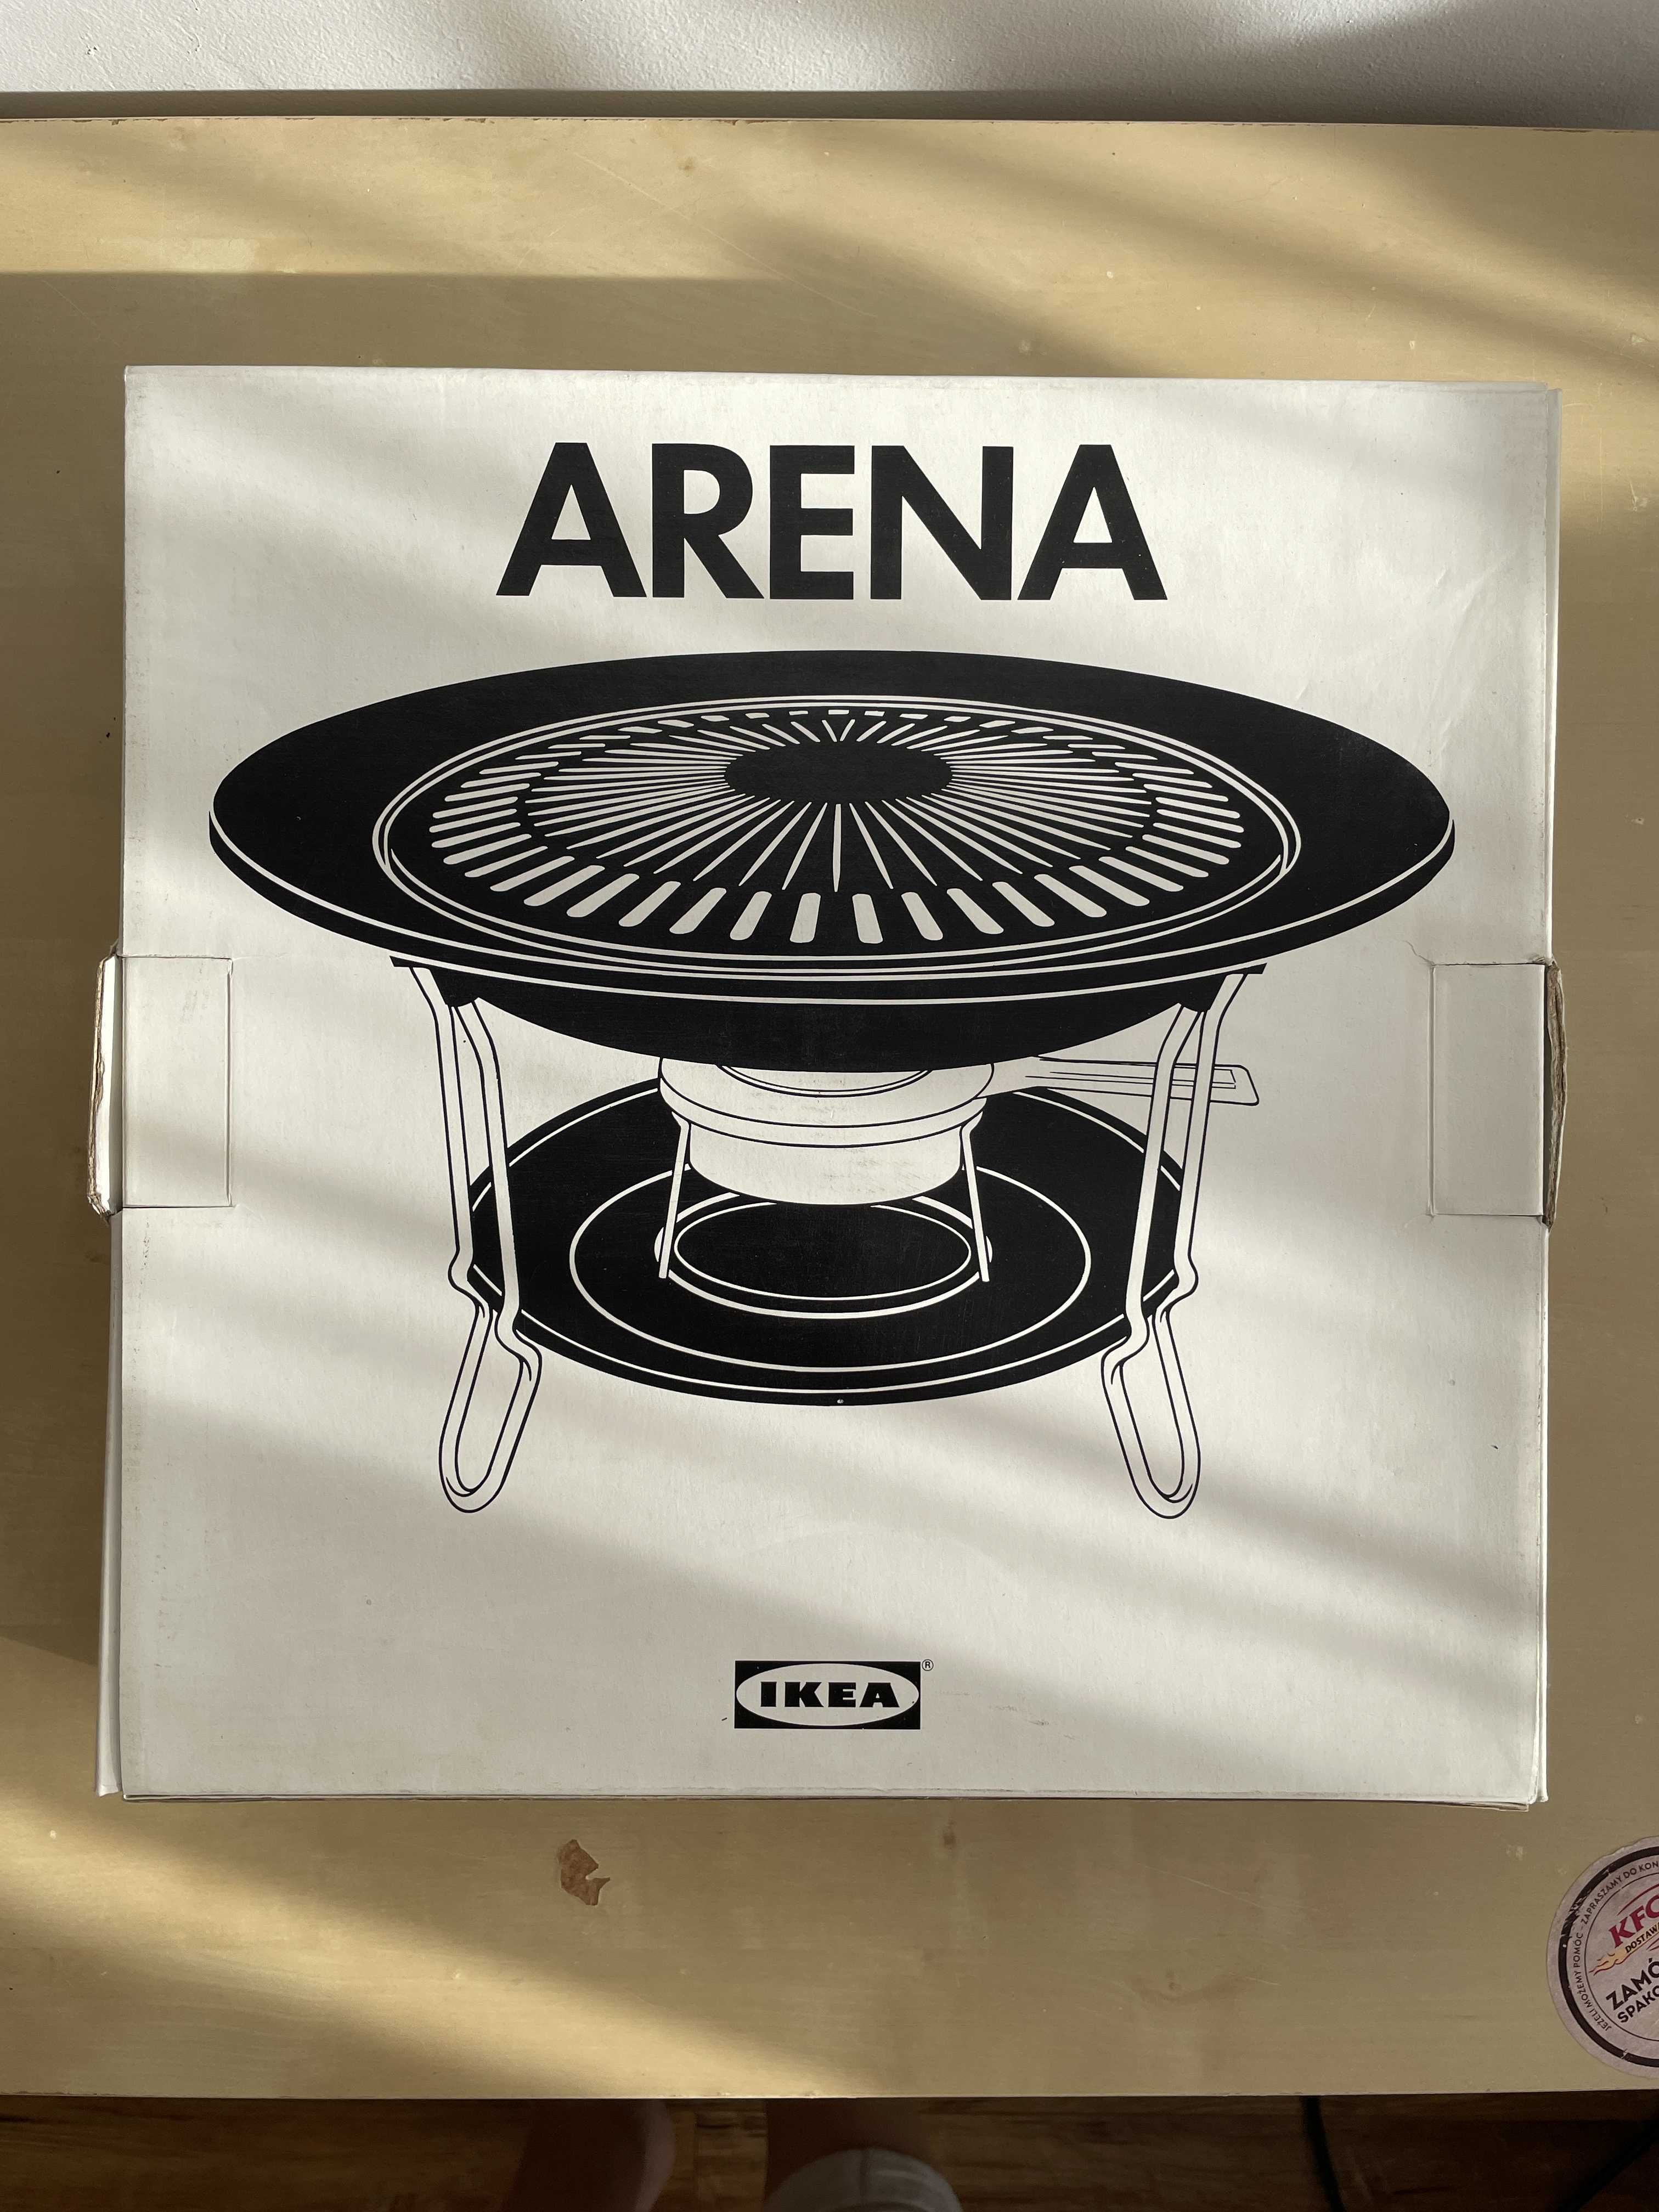 IKEA grill - Arena